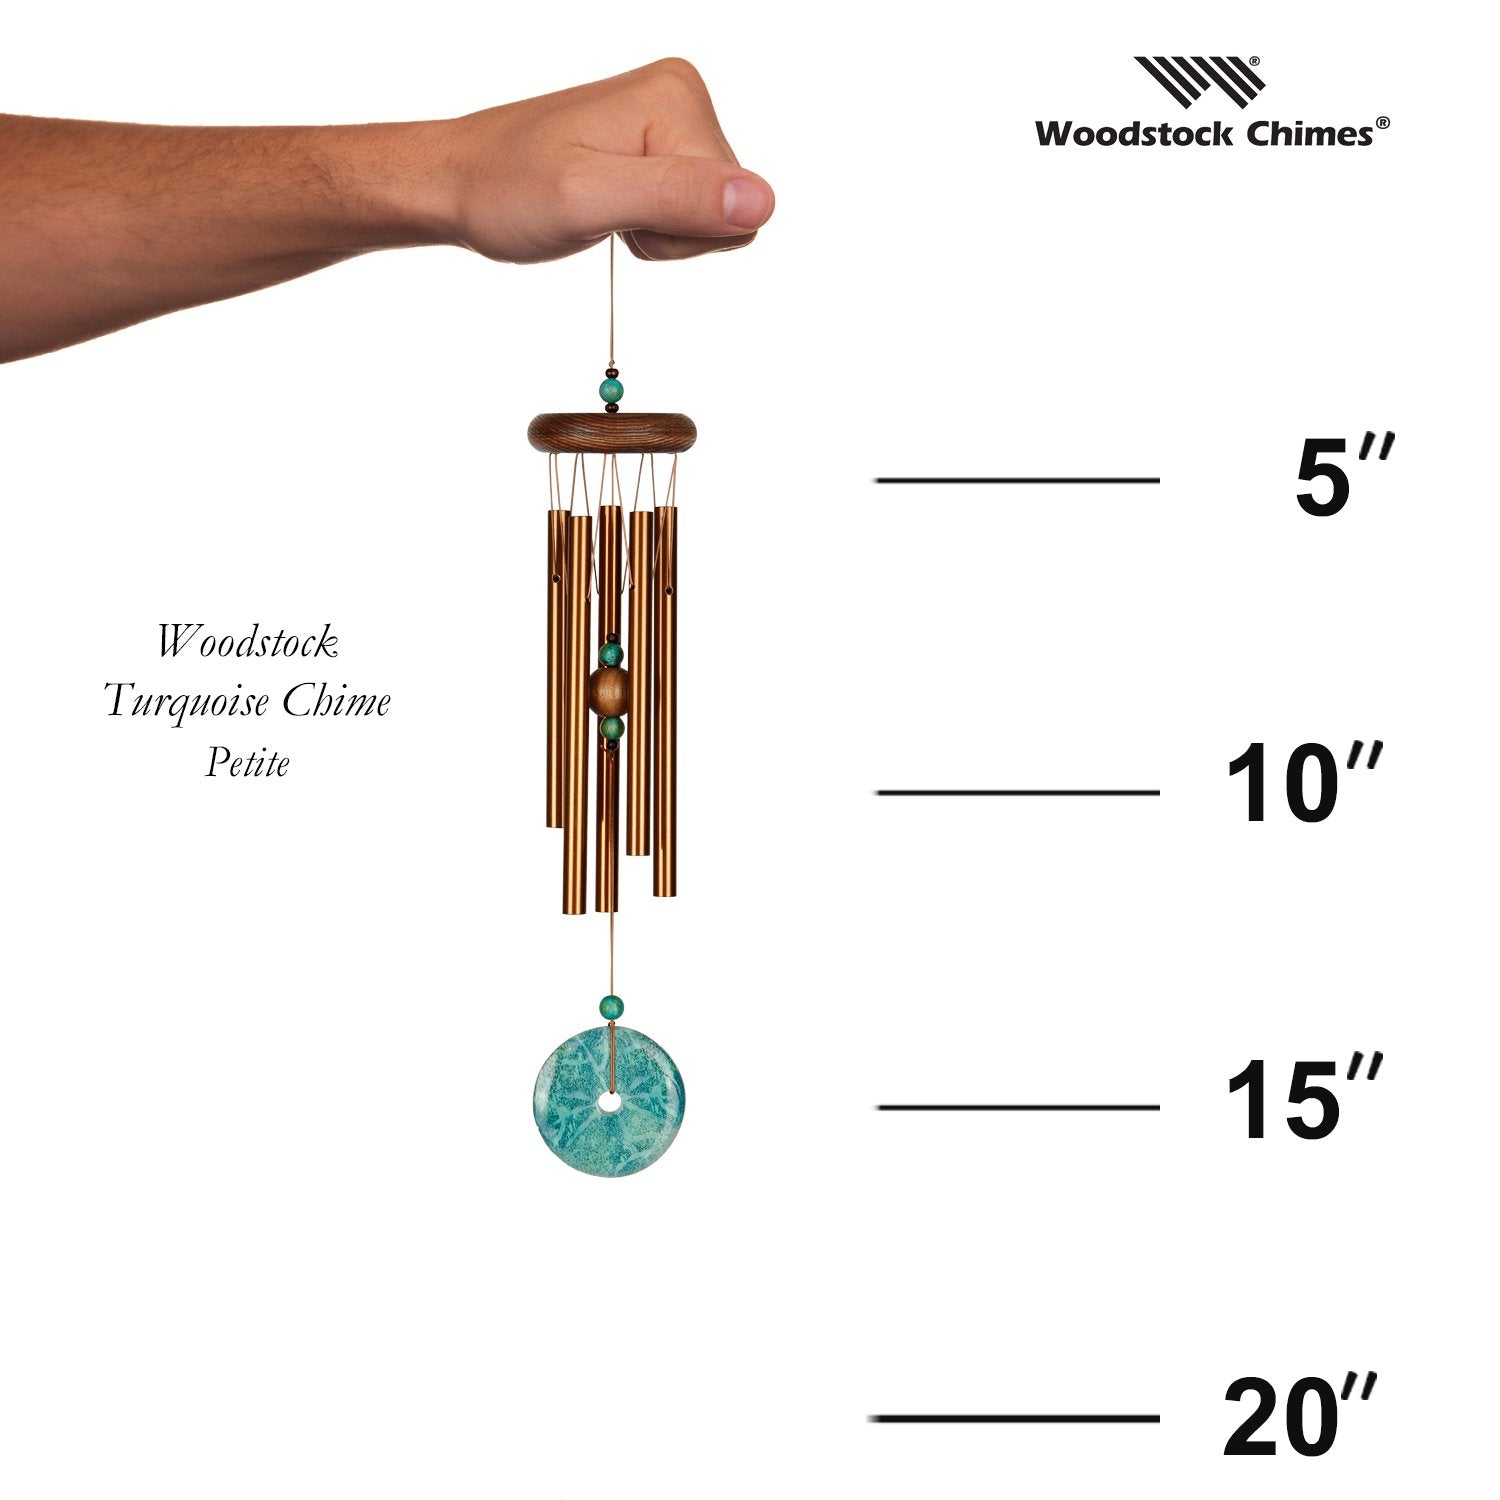 Woodstock Turquoise Chime - Petite proportion image